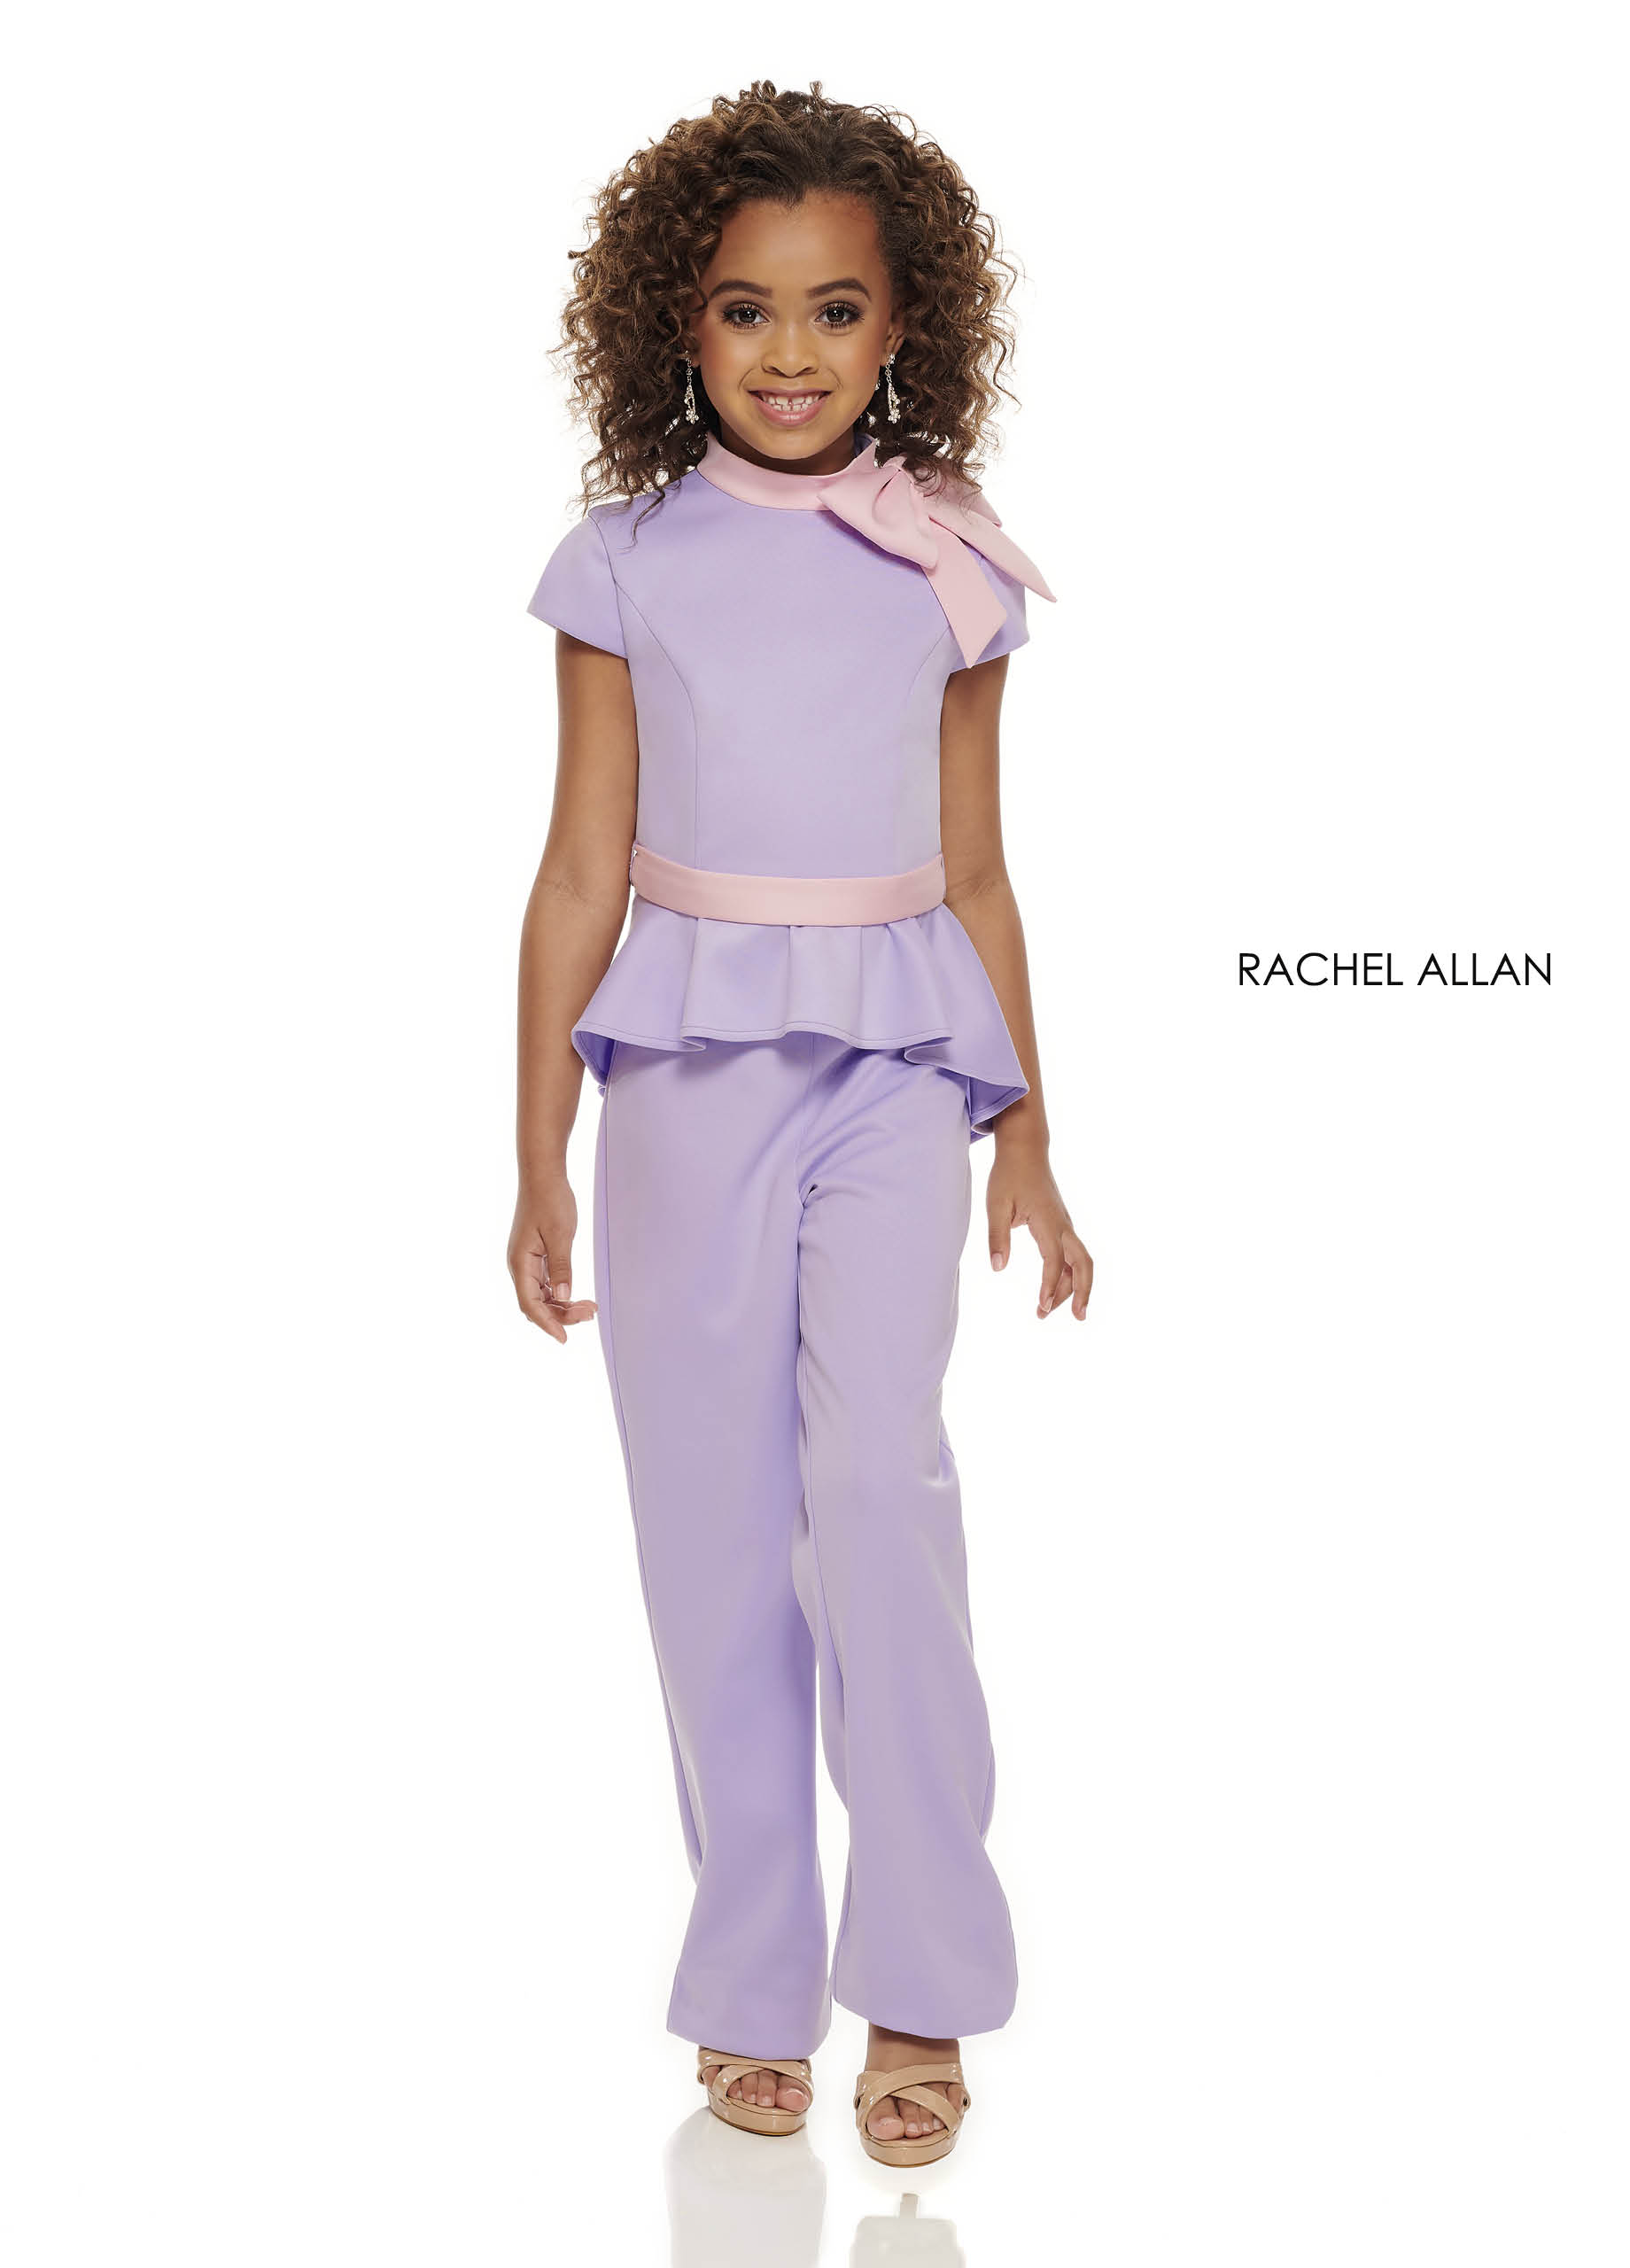 High Neckline Jumpsuit Little Girl Pageant Dresses in LILAC PINK Color